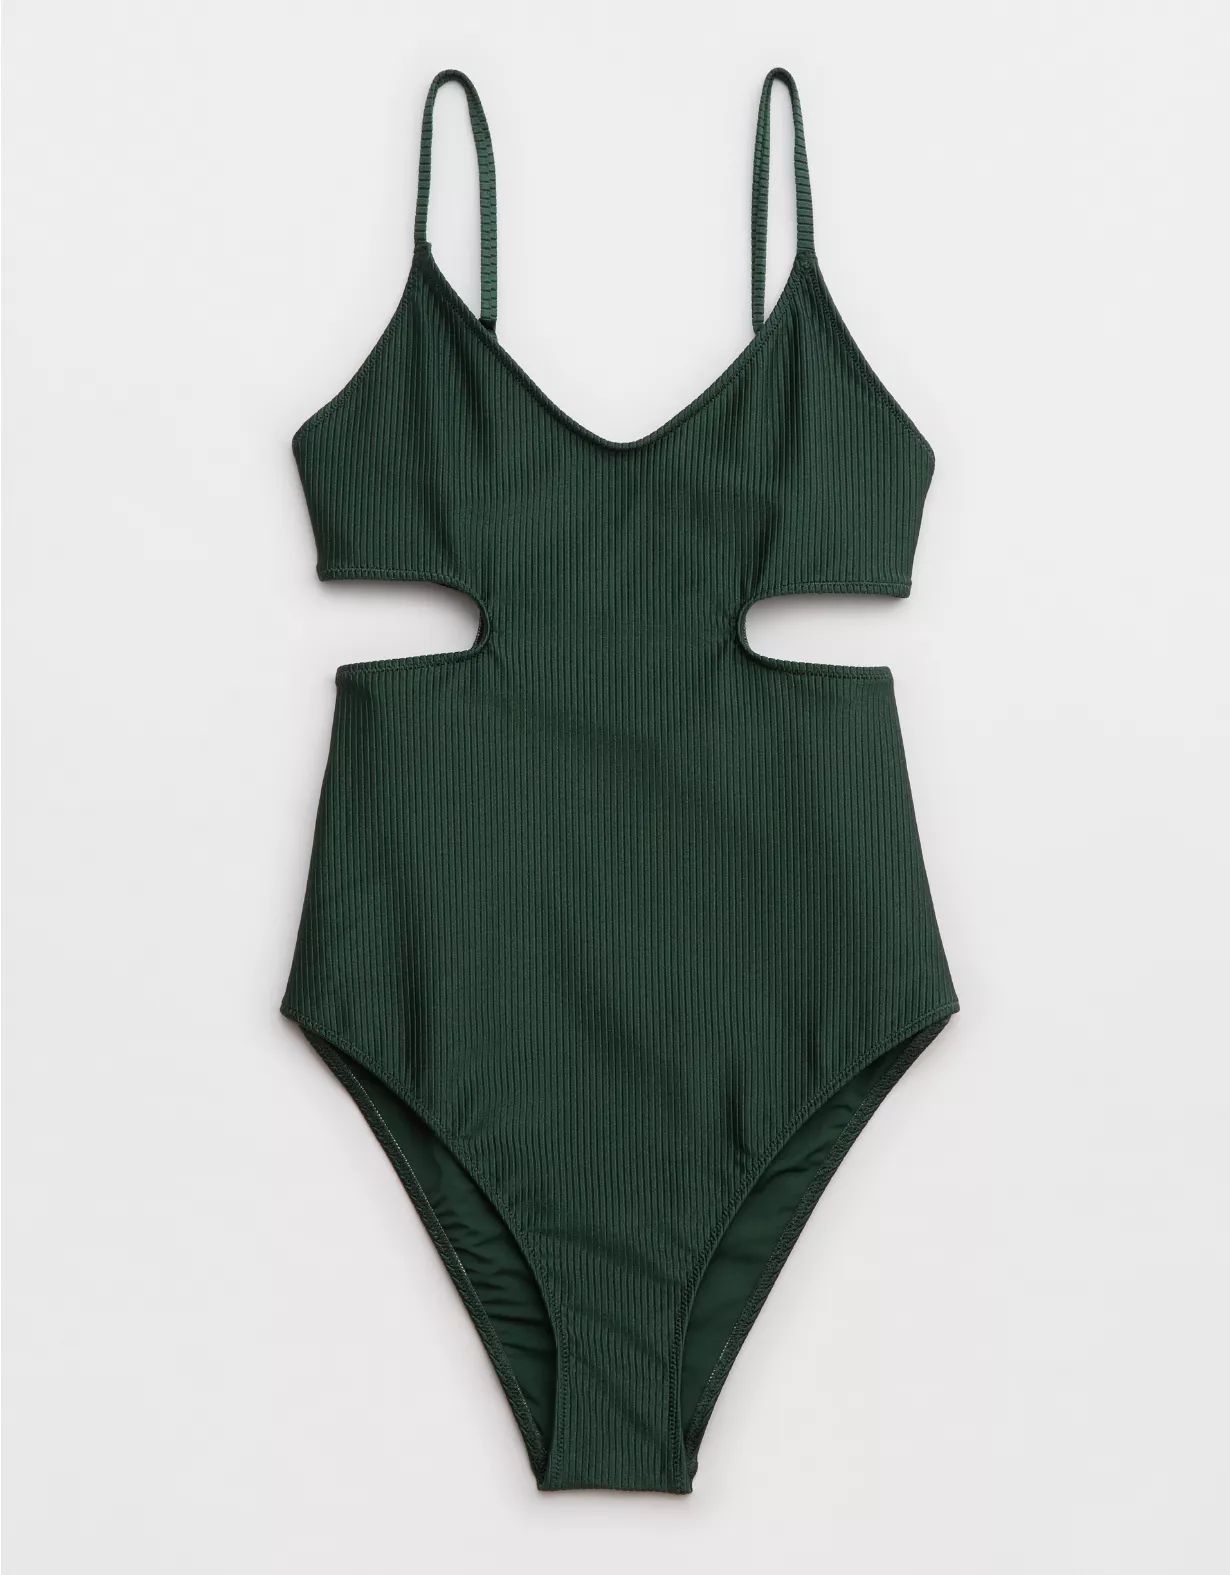 Aerie Shine Rib Voop Cheeky One Piece Swimsuit | Aerie